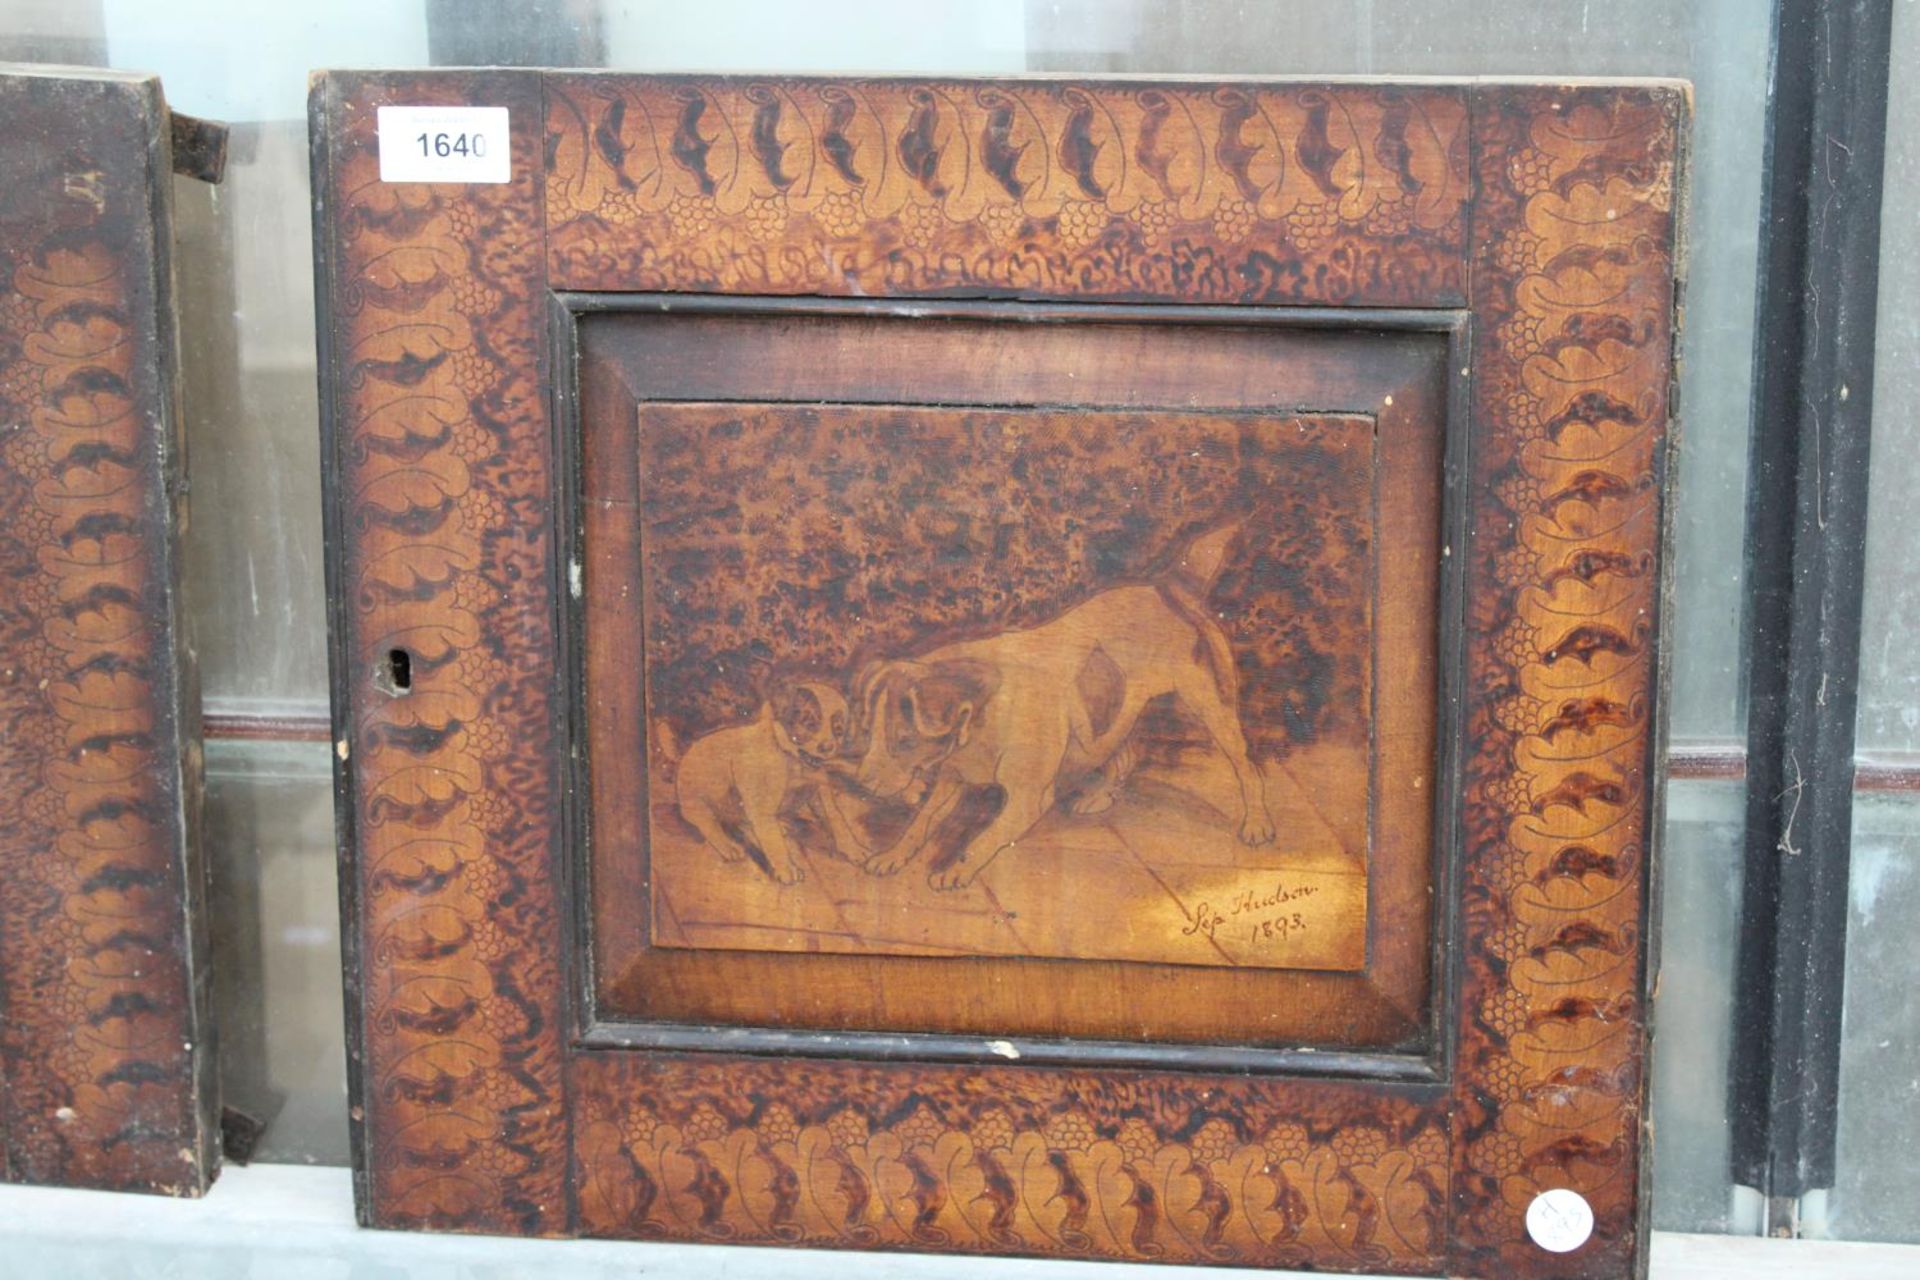 TWO VINTAGE WOODEN ETCHED BOARDS DEPICTING DOGS SIGNED AND DATED HUDSON 1893 TO THE BOTTOM RIGHT - Image 2 of 4